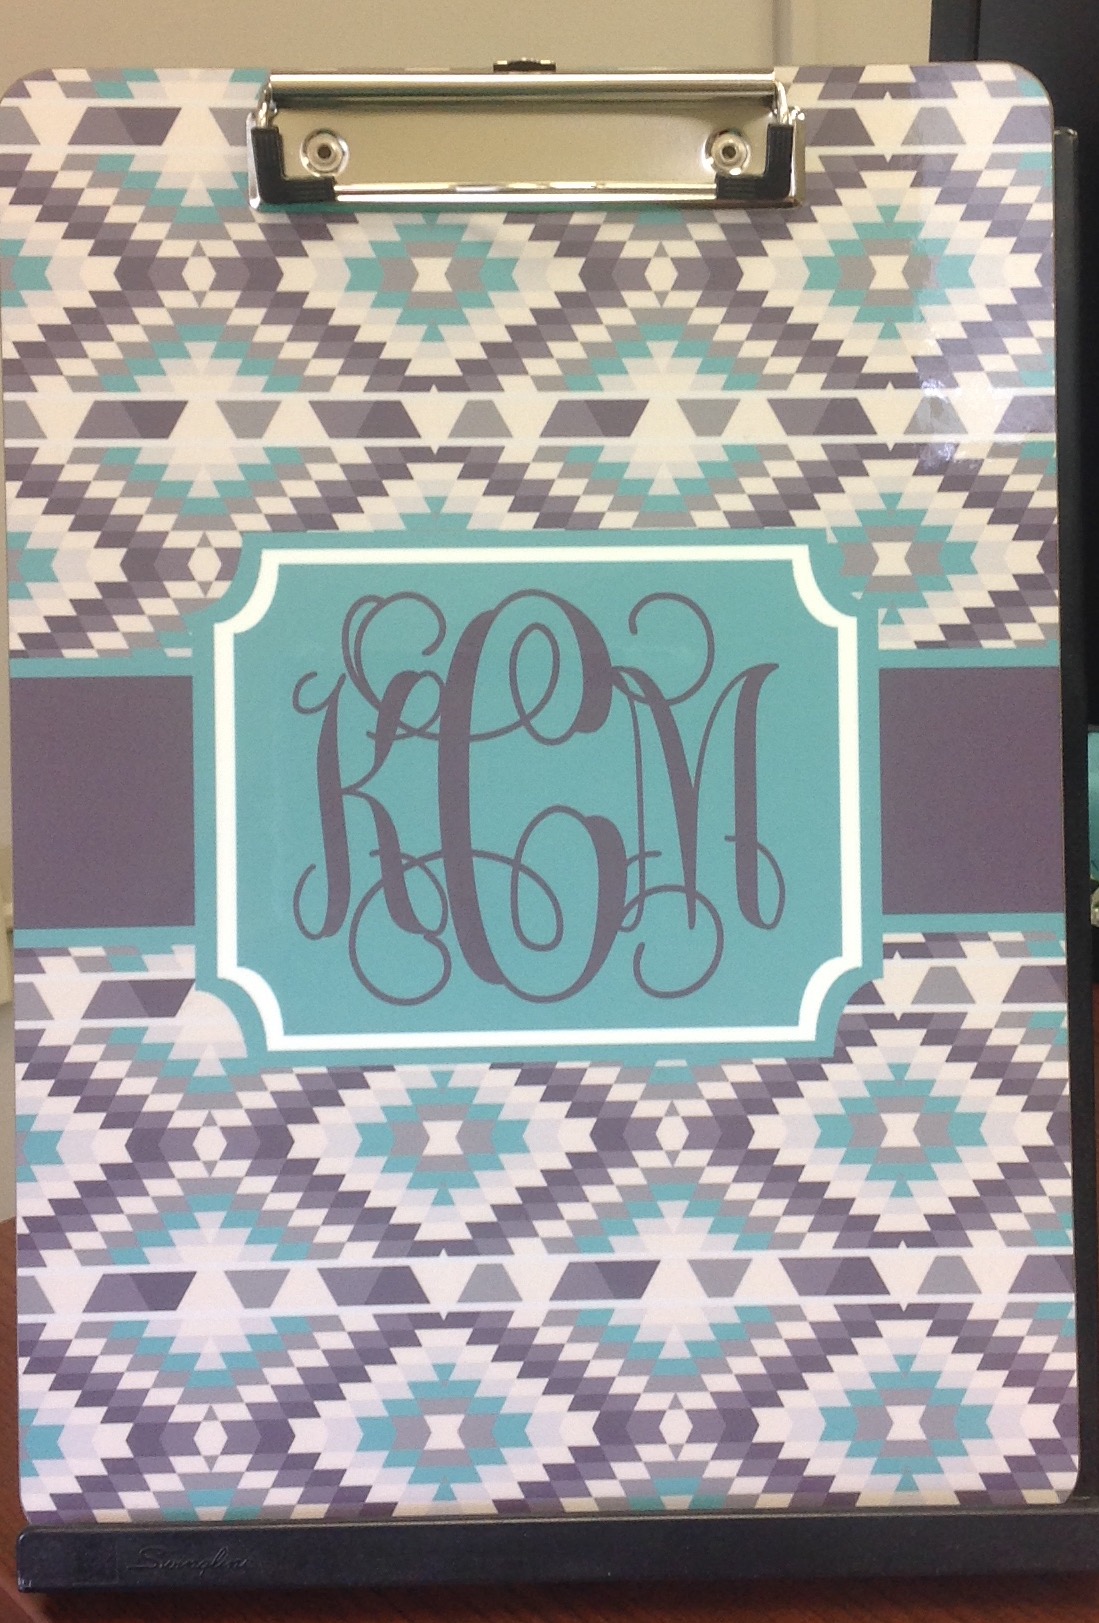 Tribal Print Clipboard made with sublimation printing